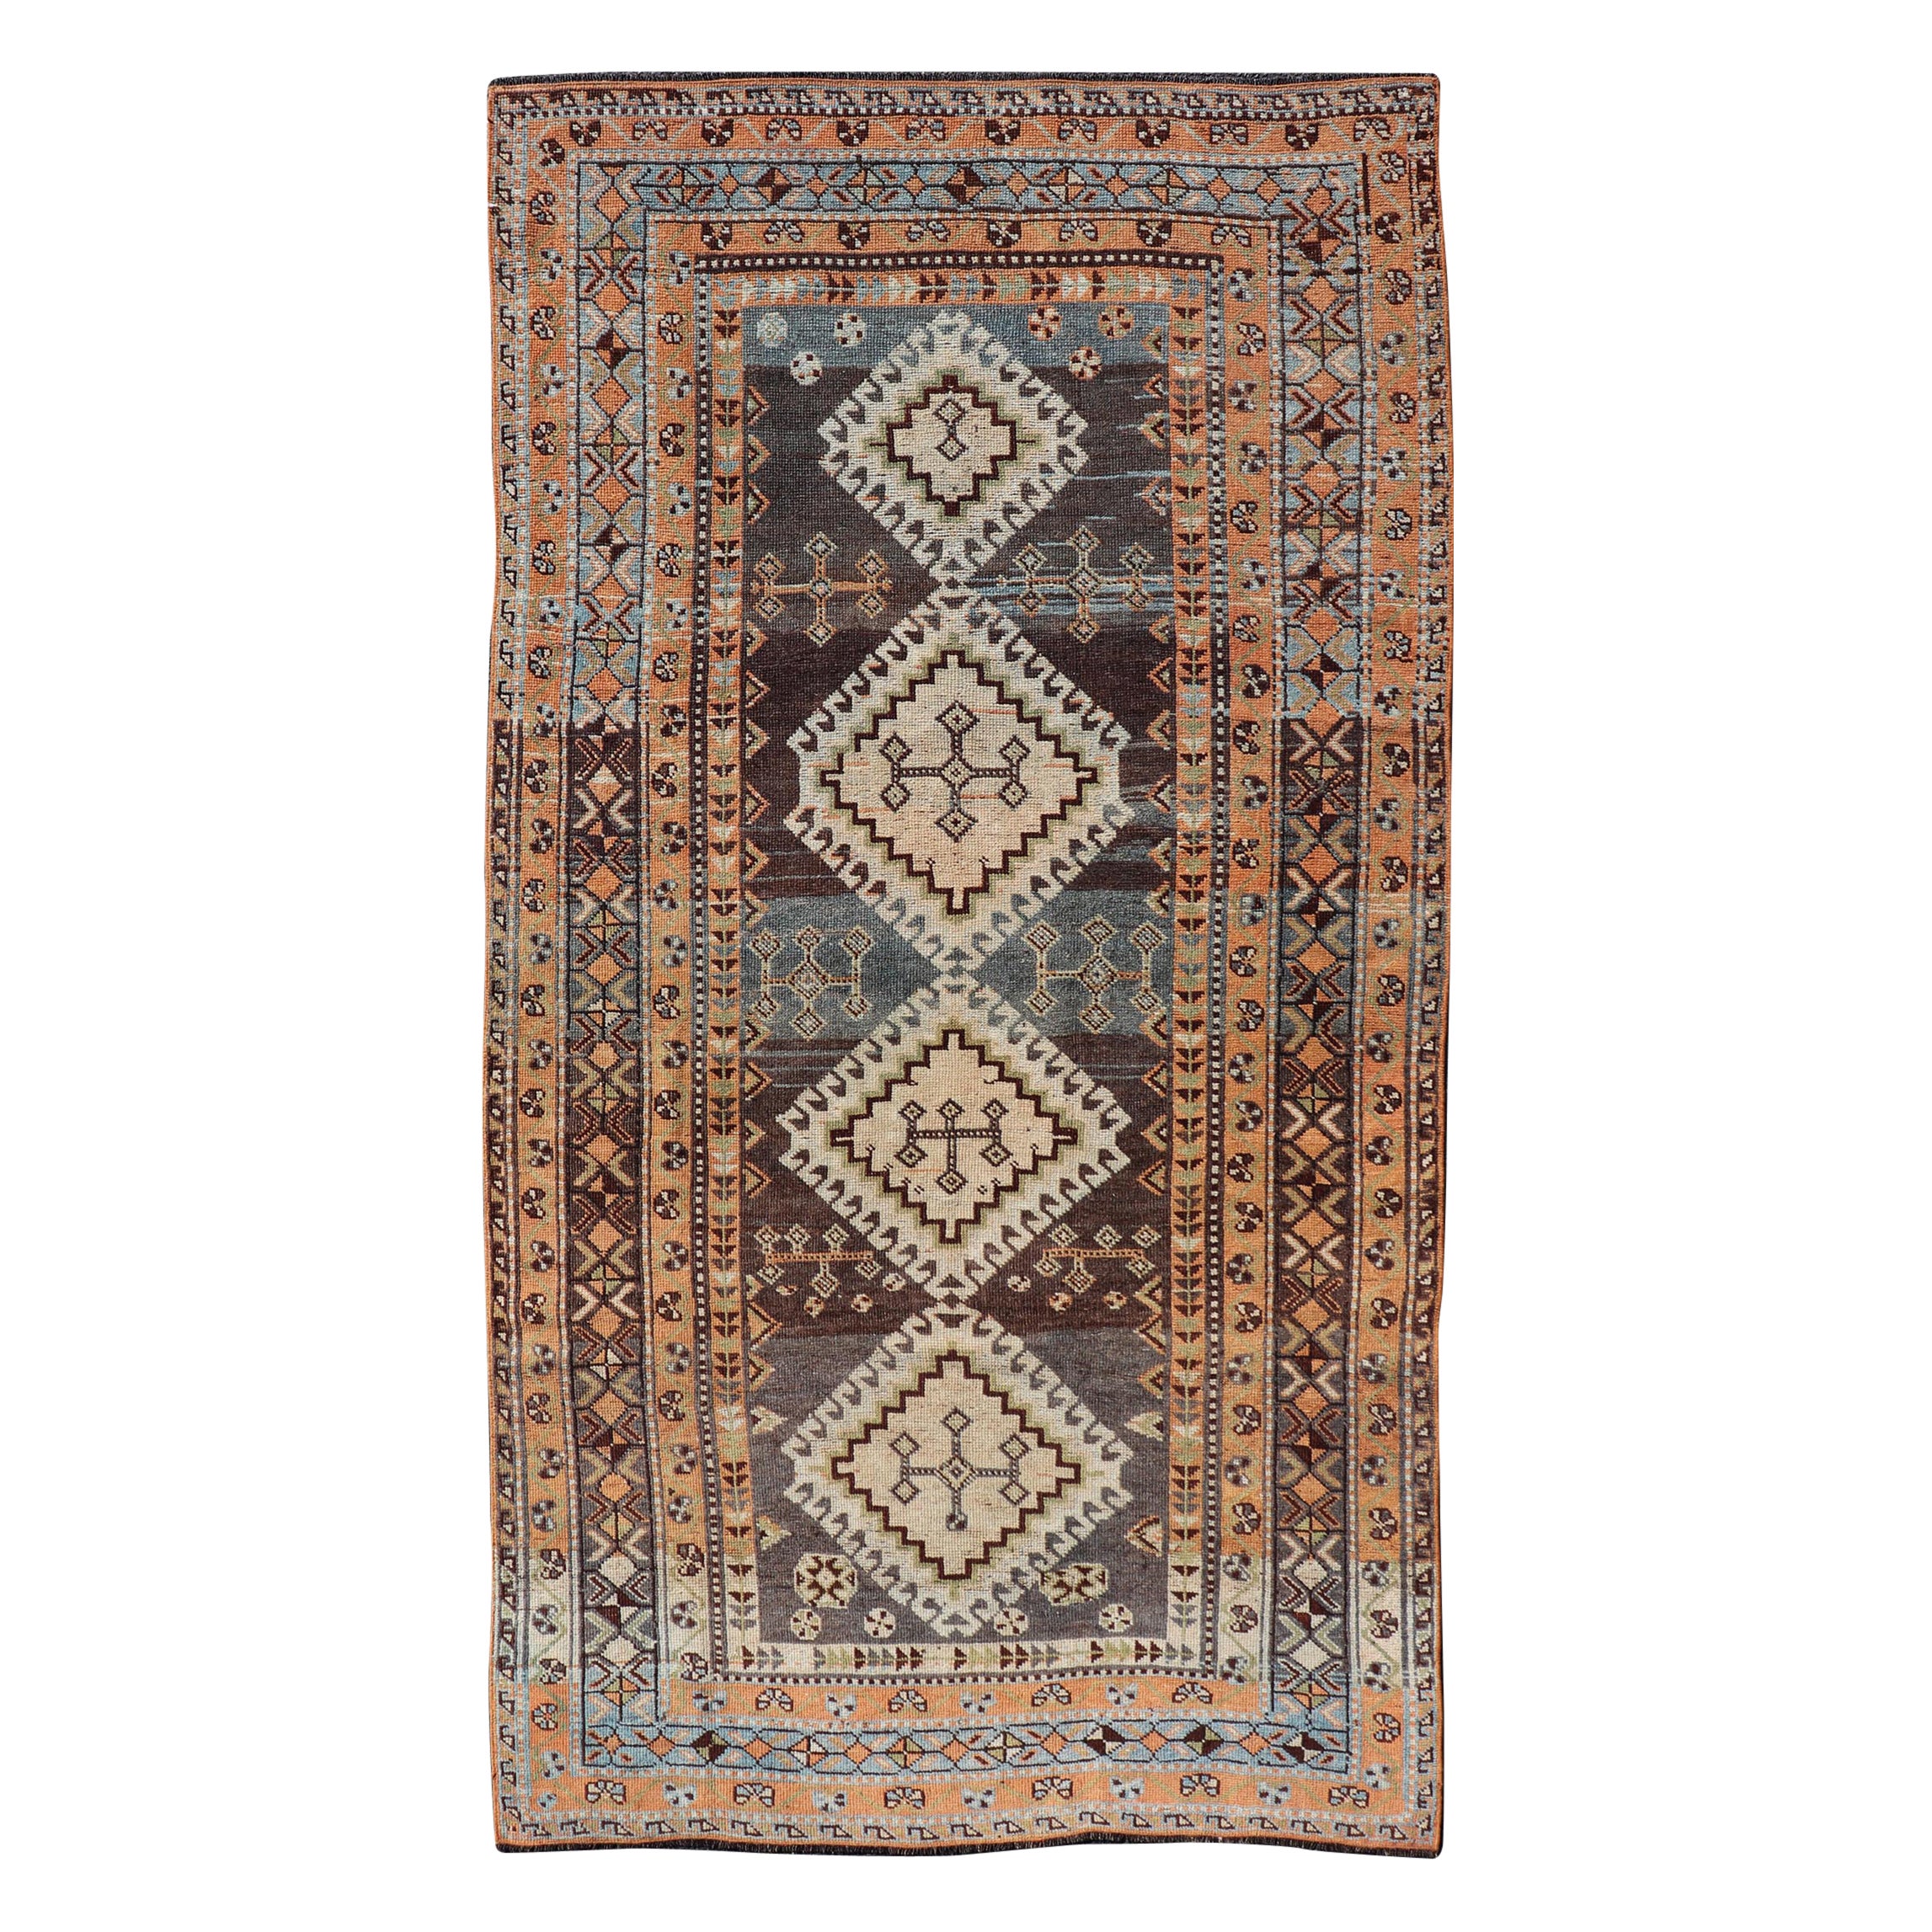 Antique Persian Lori Rug with All-Over Geometric Tribal Medallion Design